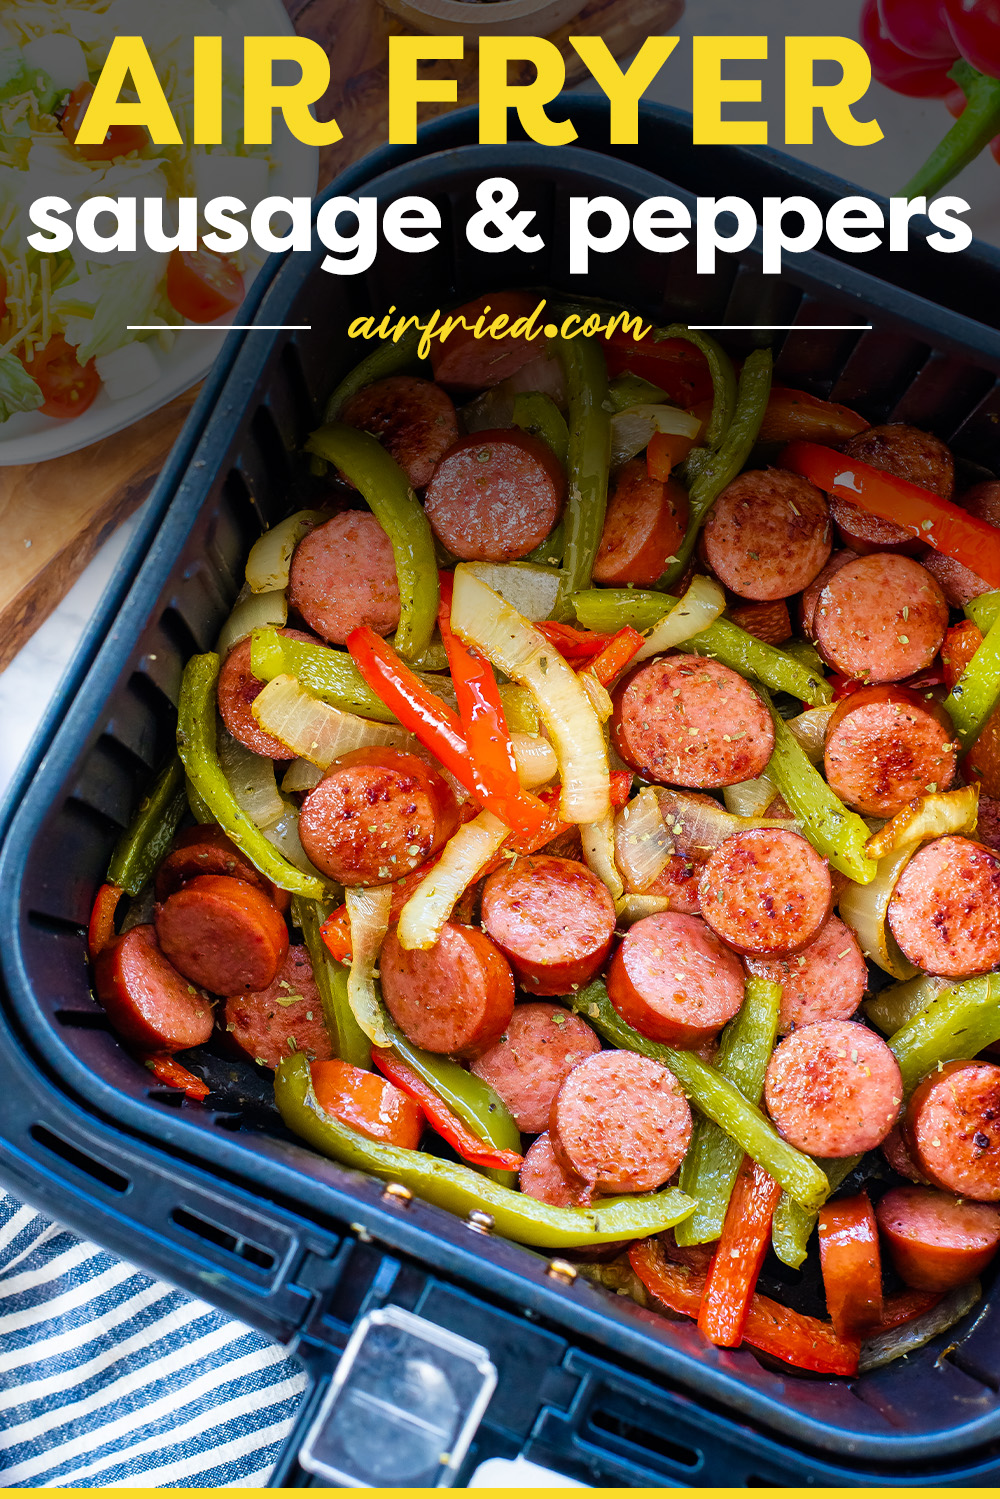 The sausage really pops next to the onions and peppers in this recipe!  The use of the air fryer is perfect for blending the flavors of the sausage and the peppers too!